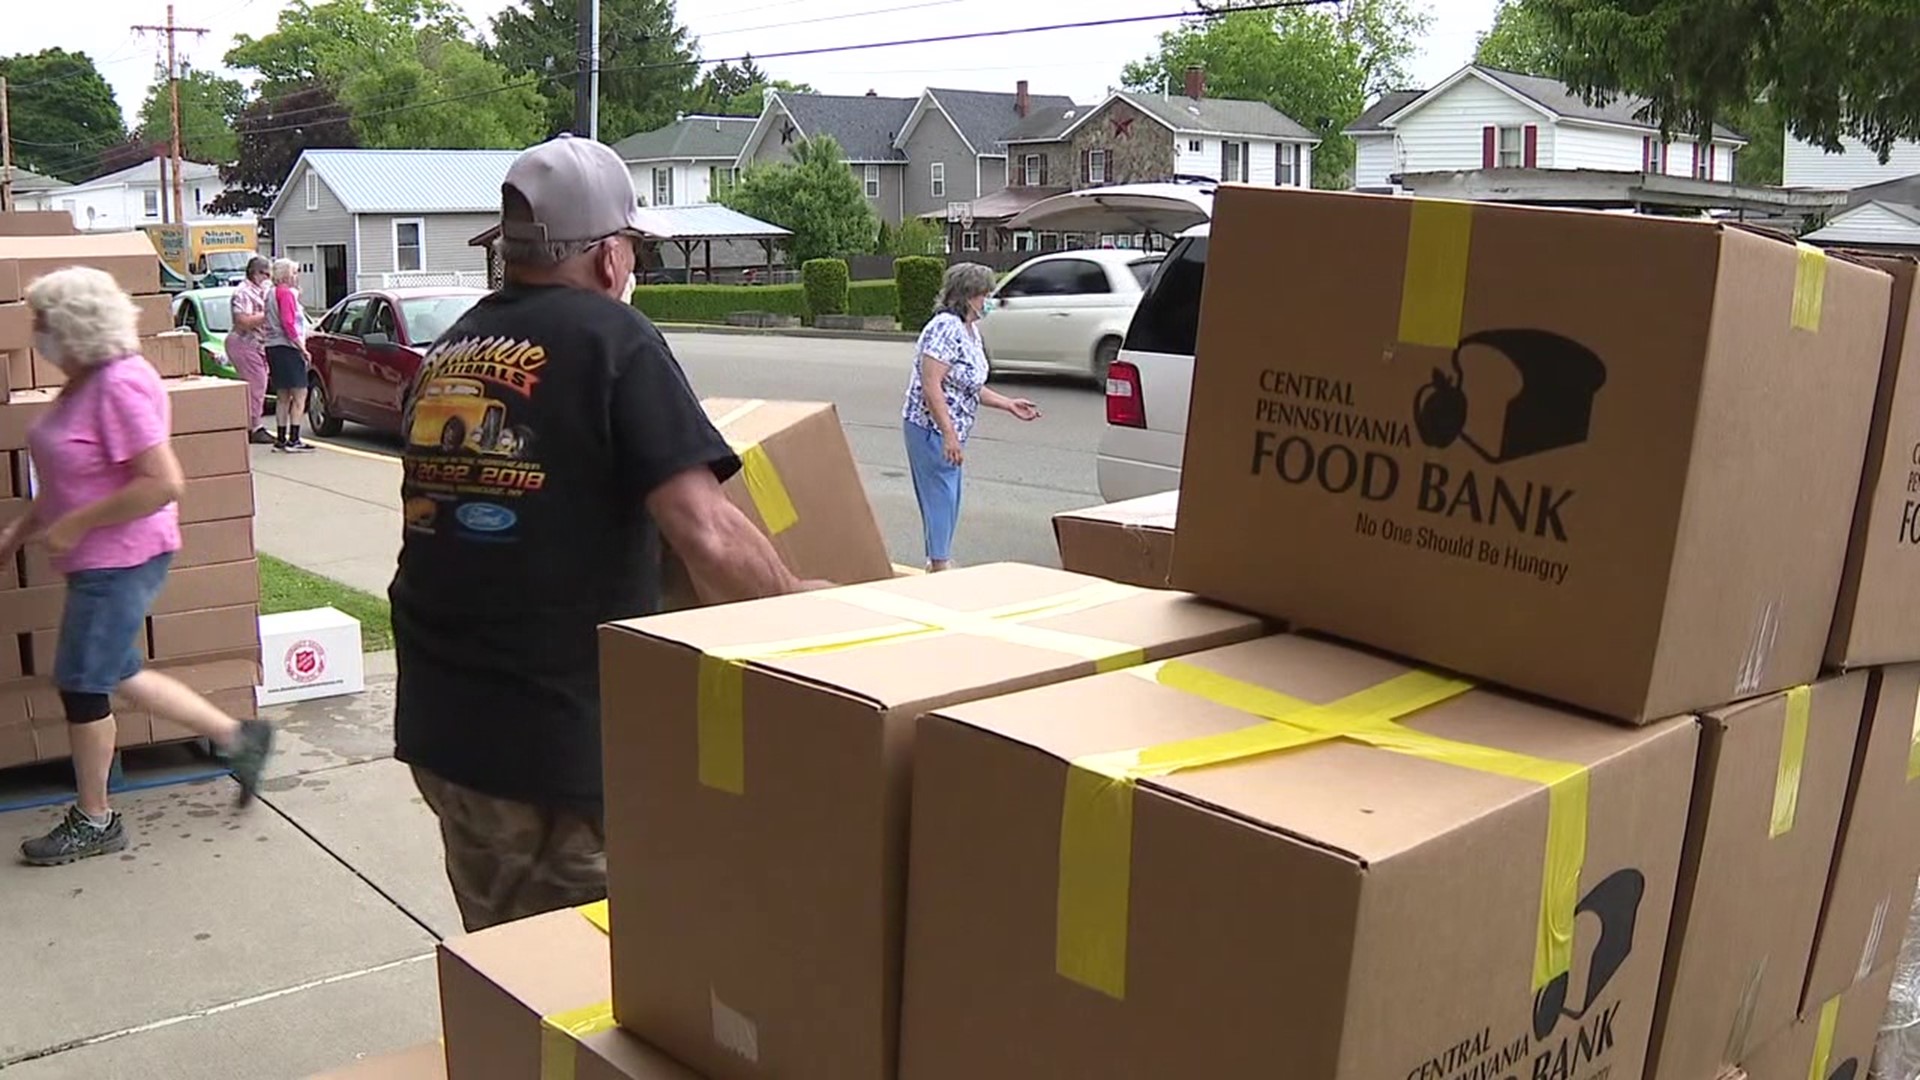 Around 150 families in the northern tier received free food from the Salvation Army.